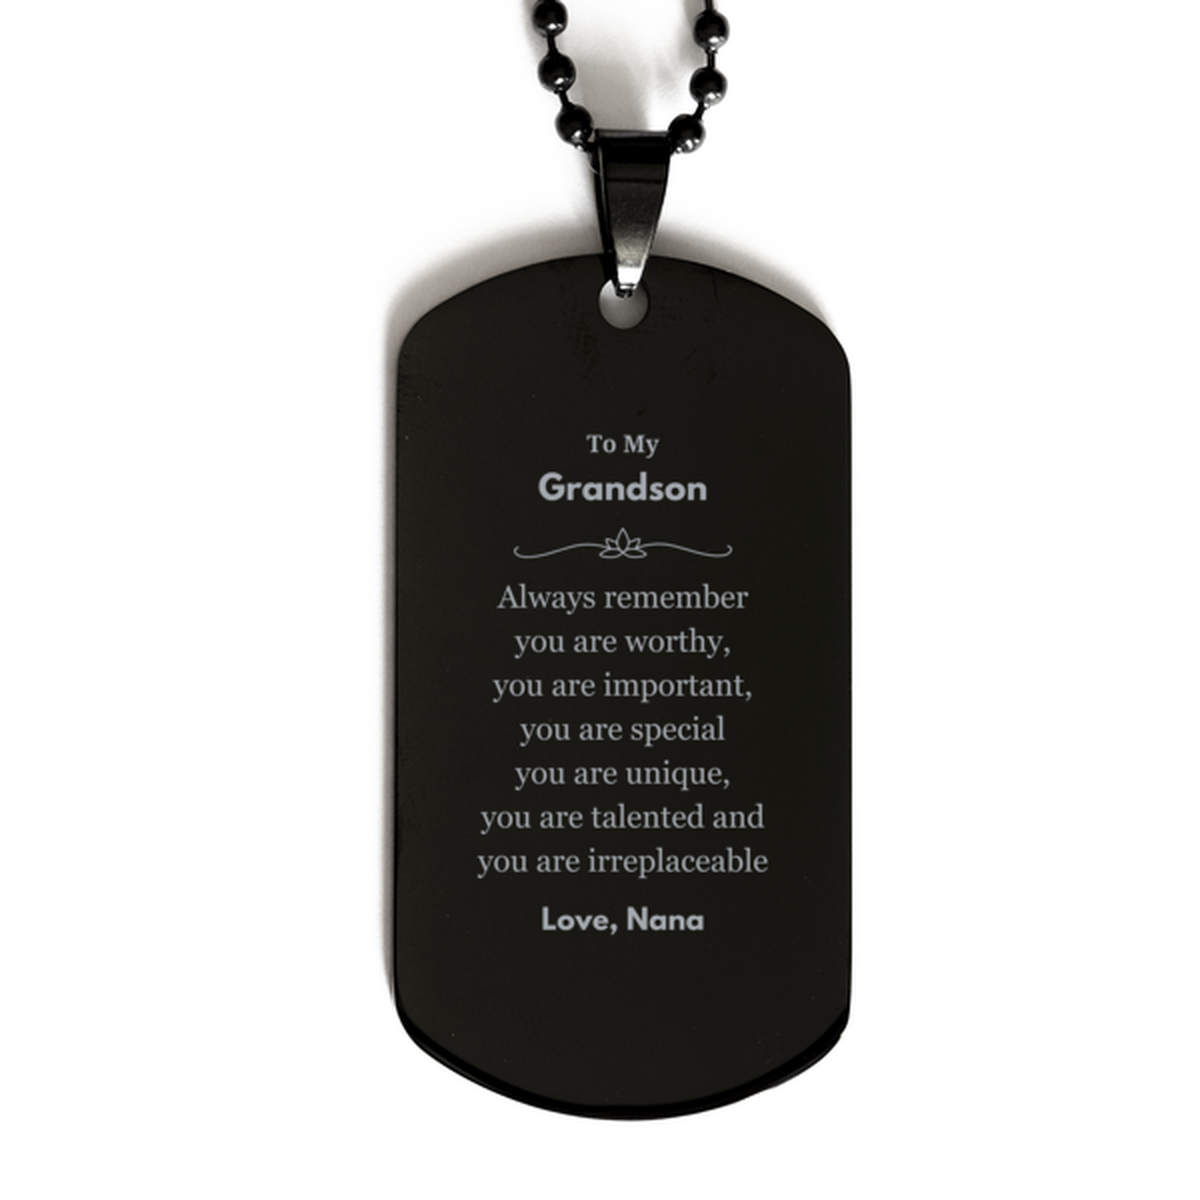 Grandson Birthday Gifts from Nana, Inspirational Black Dog Tag for Grandson Christmas Graduation Gifts for Grandson Always remember you are worthy, you are important. Love, Nana